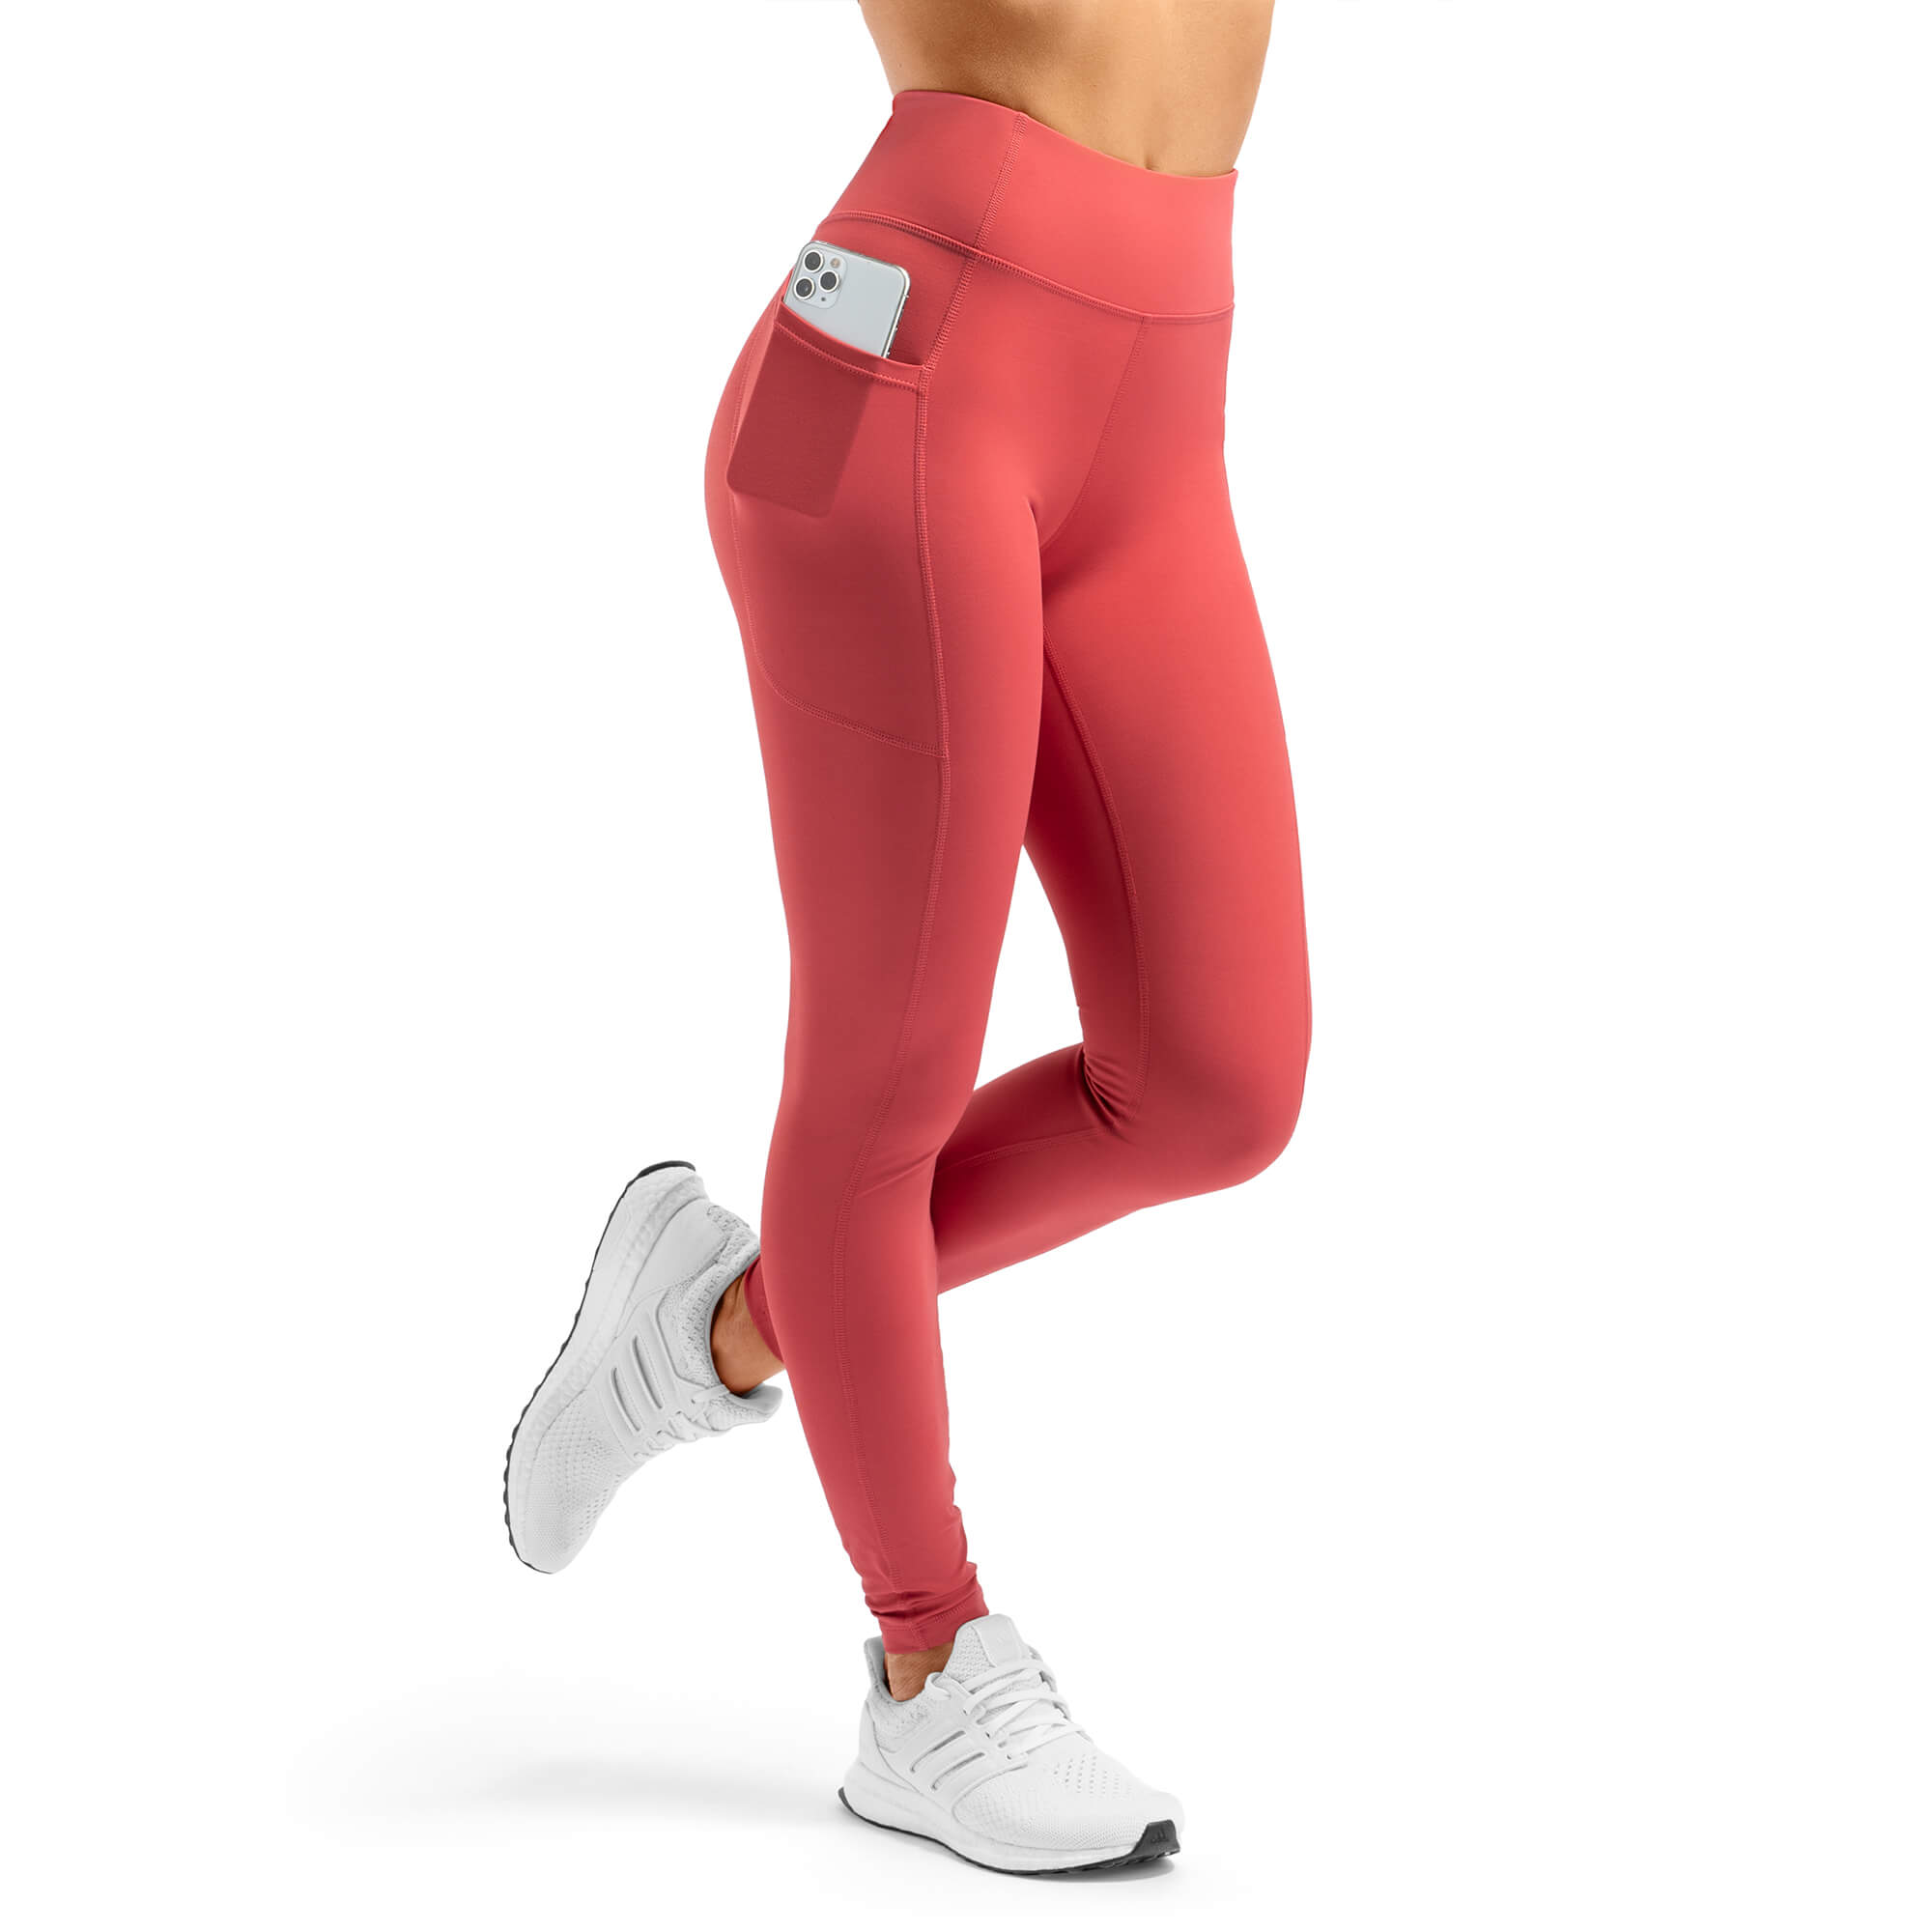 Arsenal High-Waisted Pockets Leggings - Coral - Rise